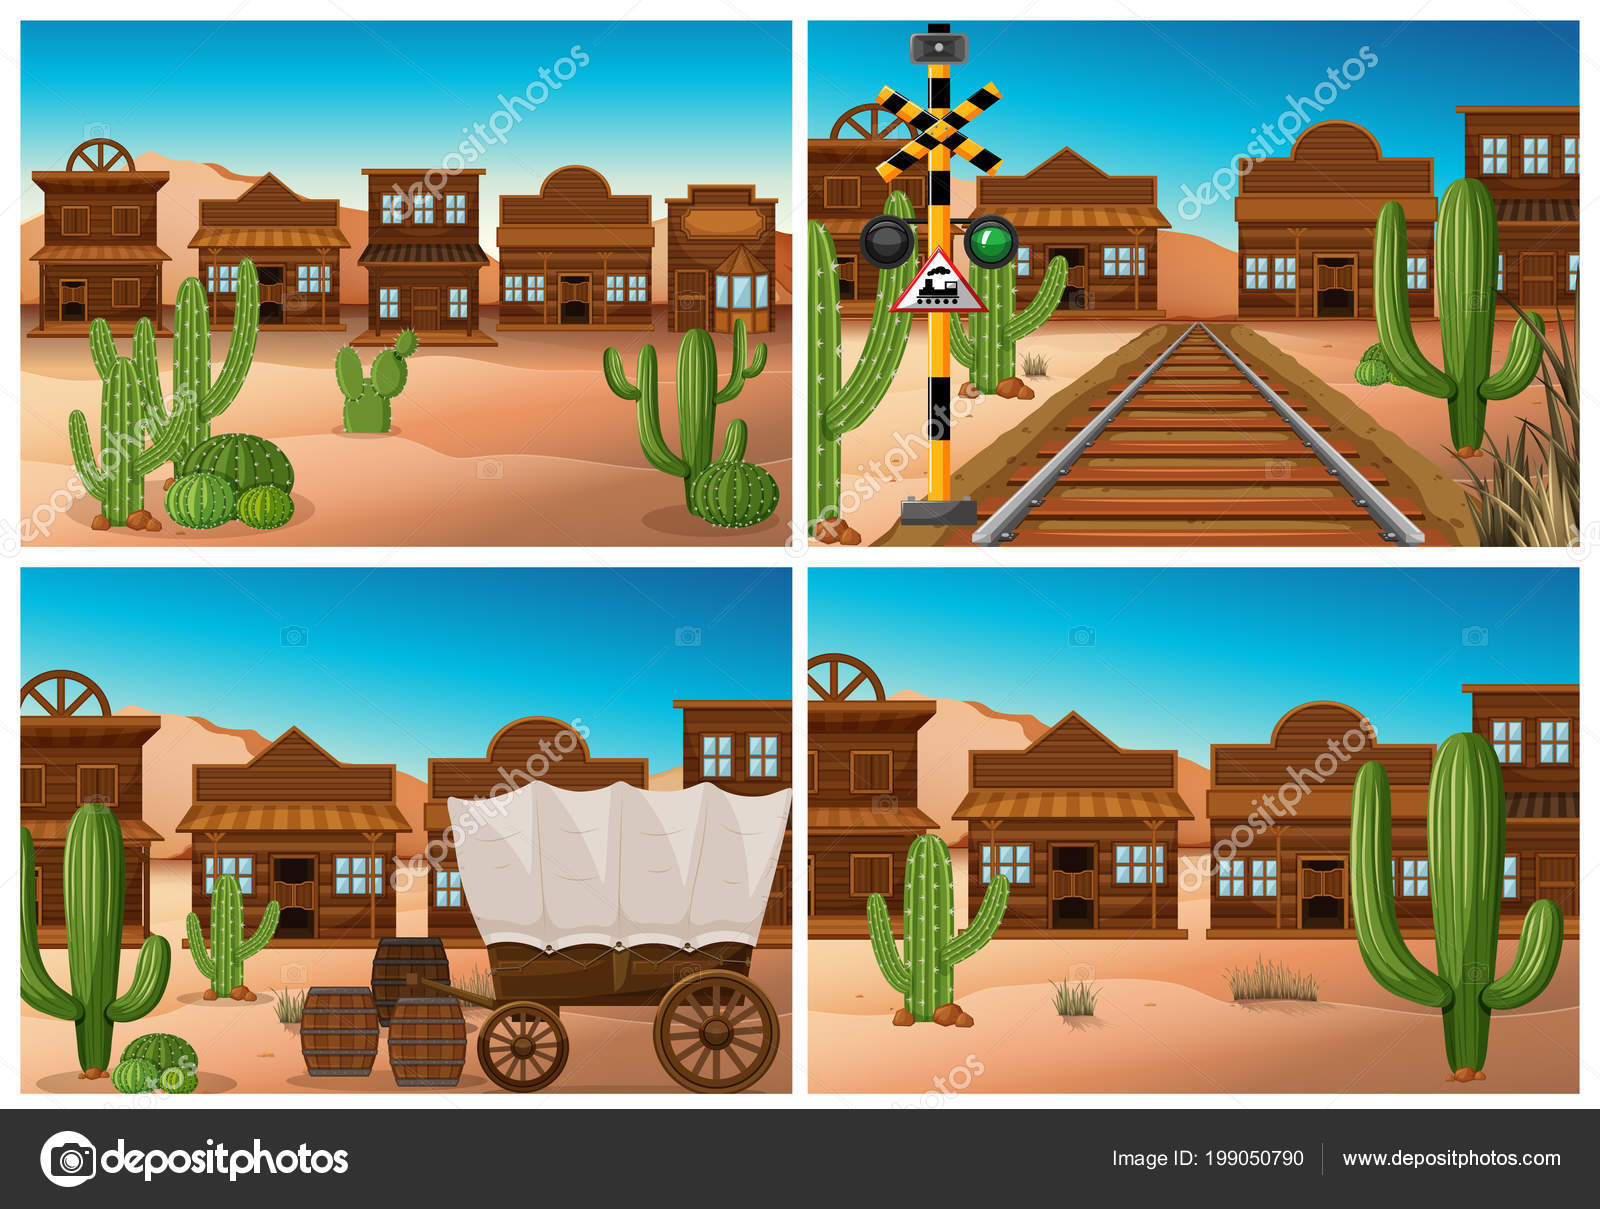 Set Wild West Town Illustration Stock Vector Image by ©blueringmedia  #199050790